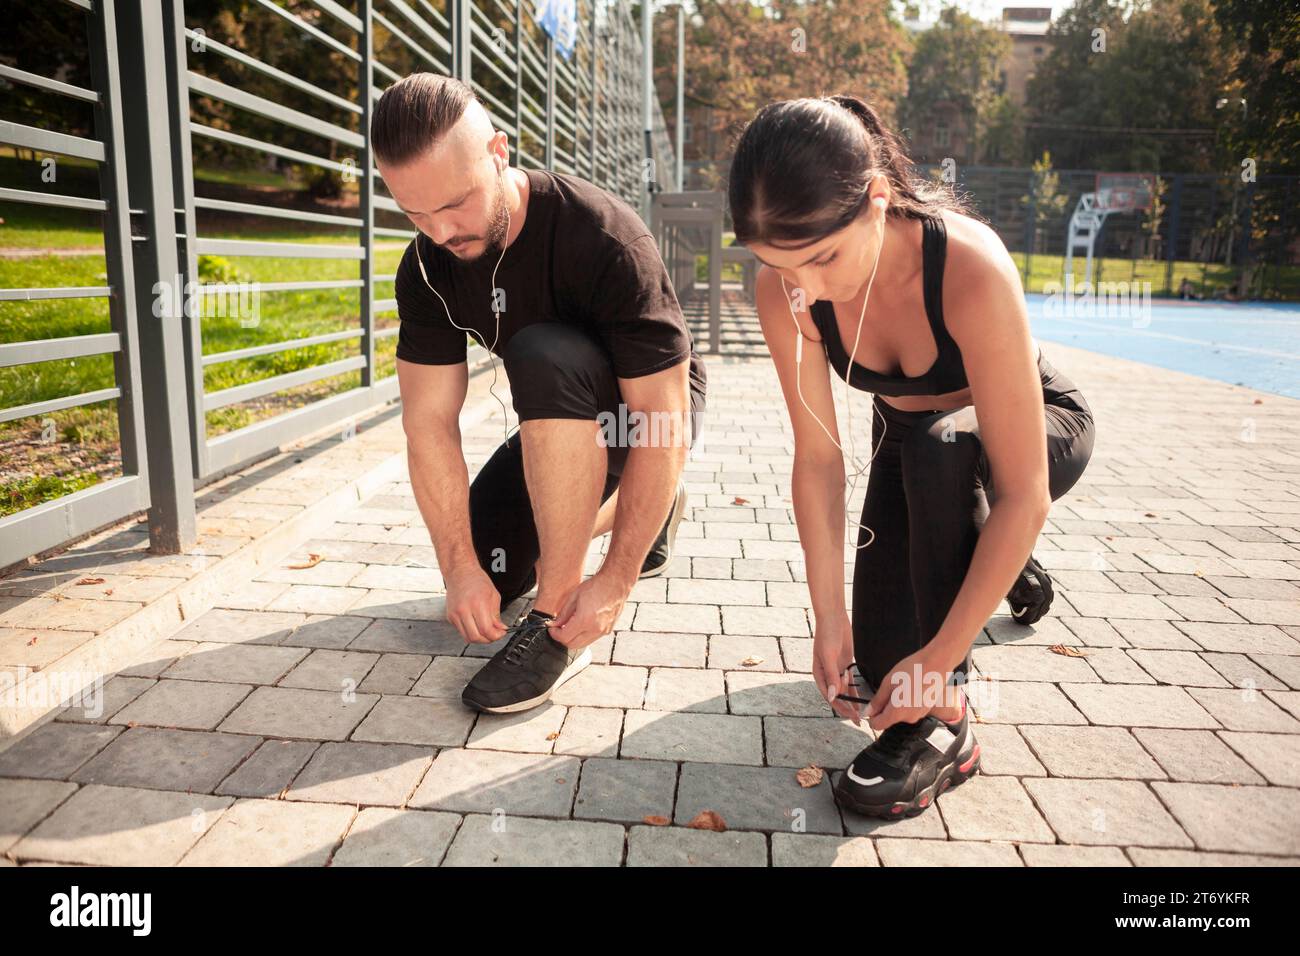 Friends outdoor training bind their shoelaces Stock Photo